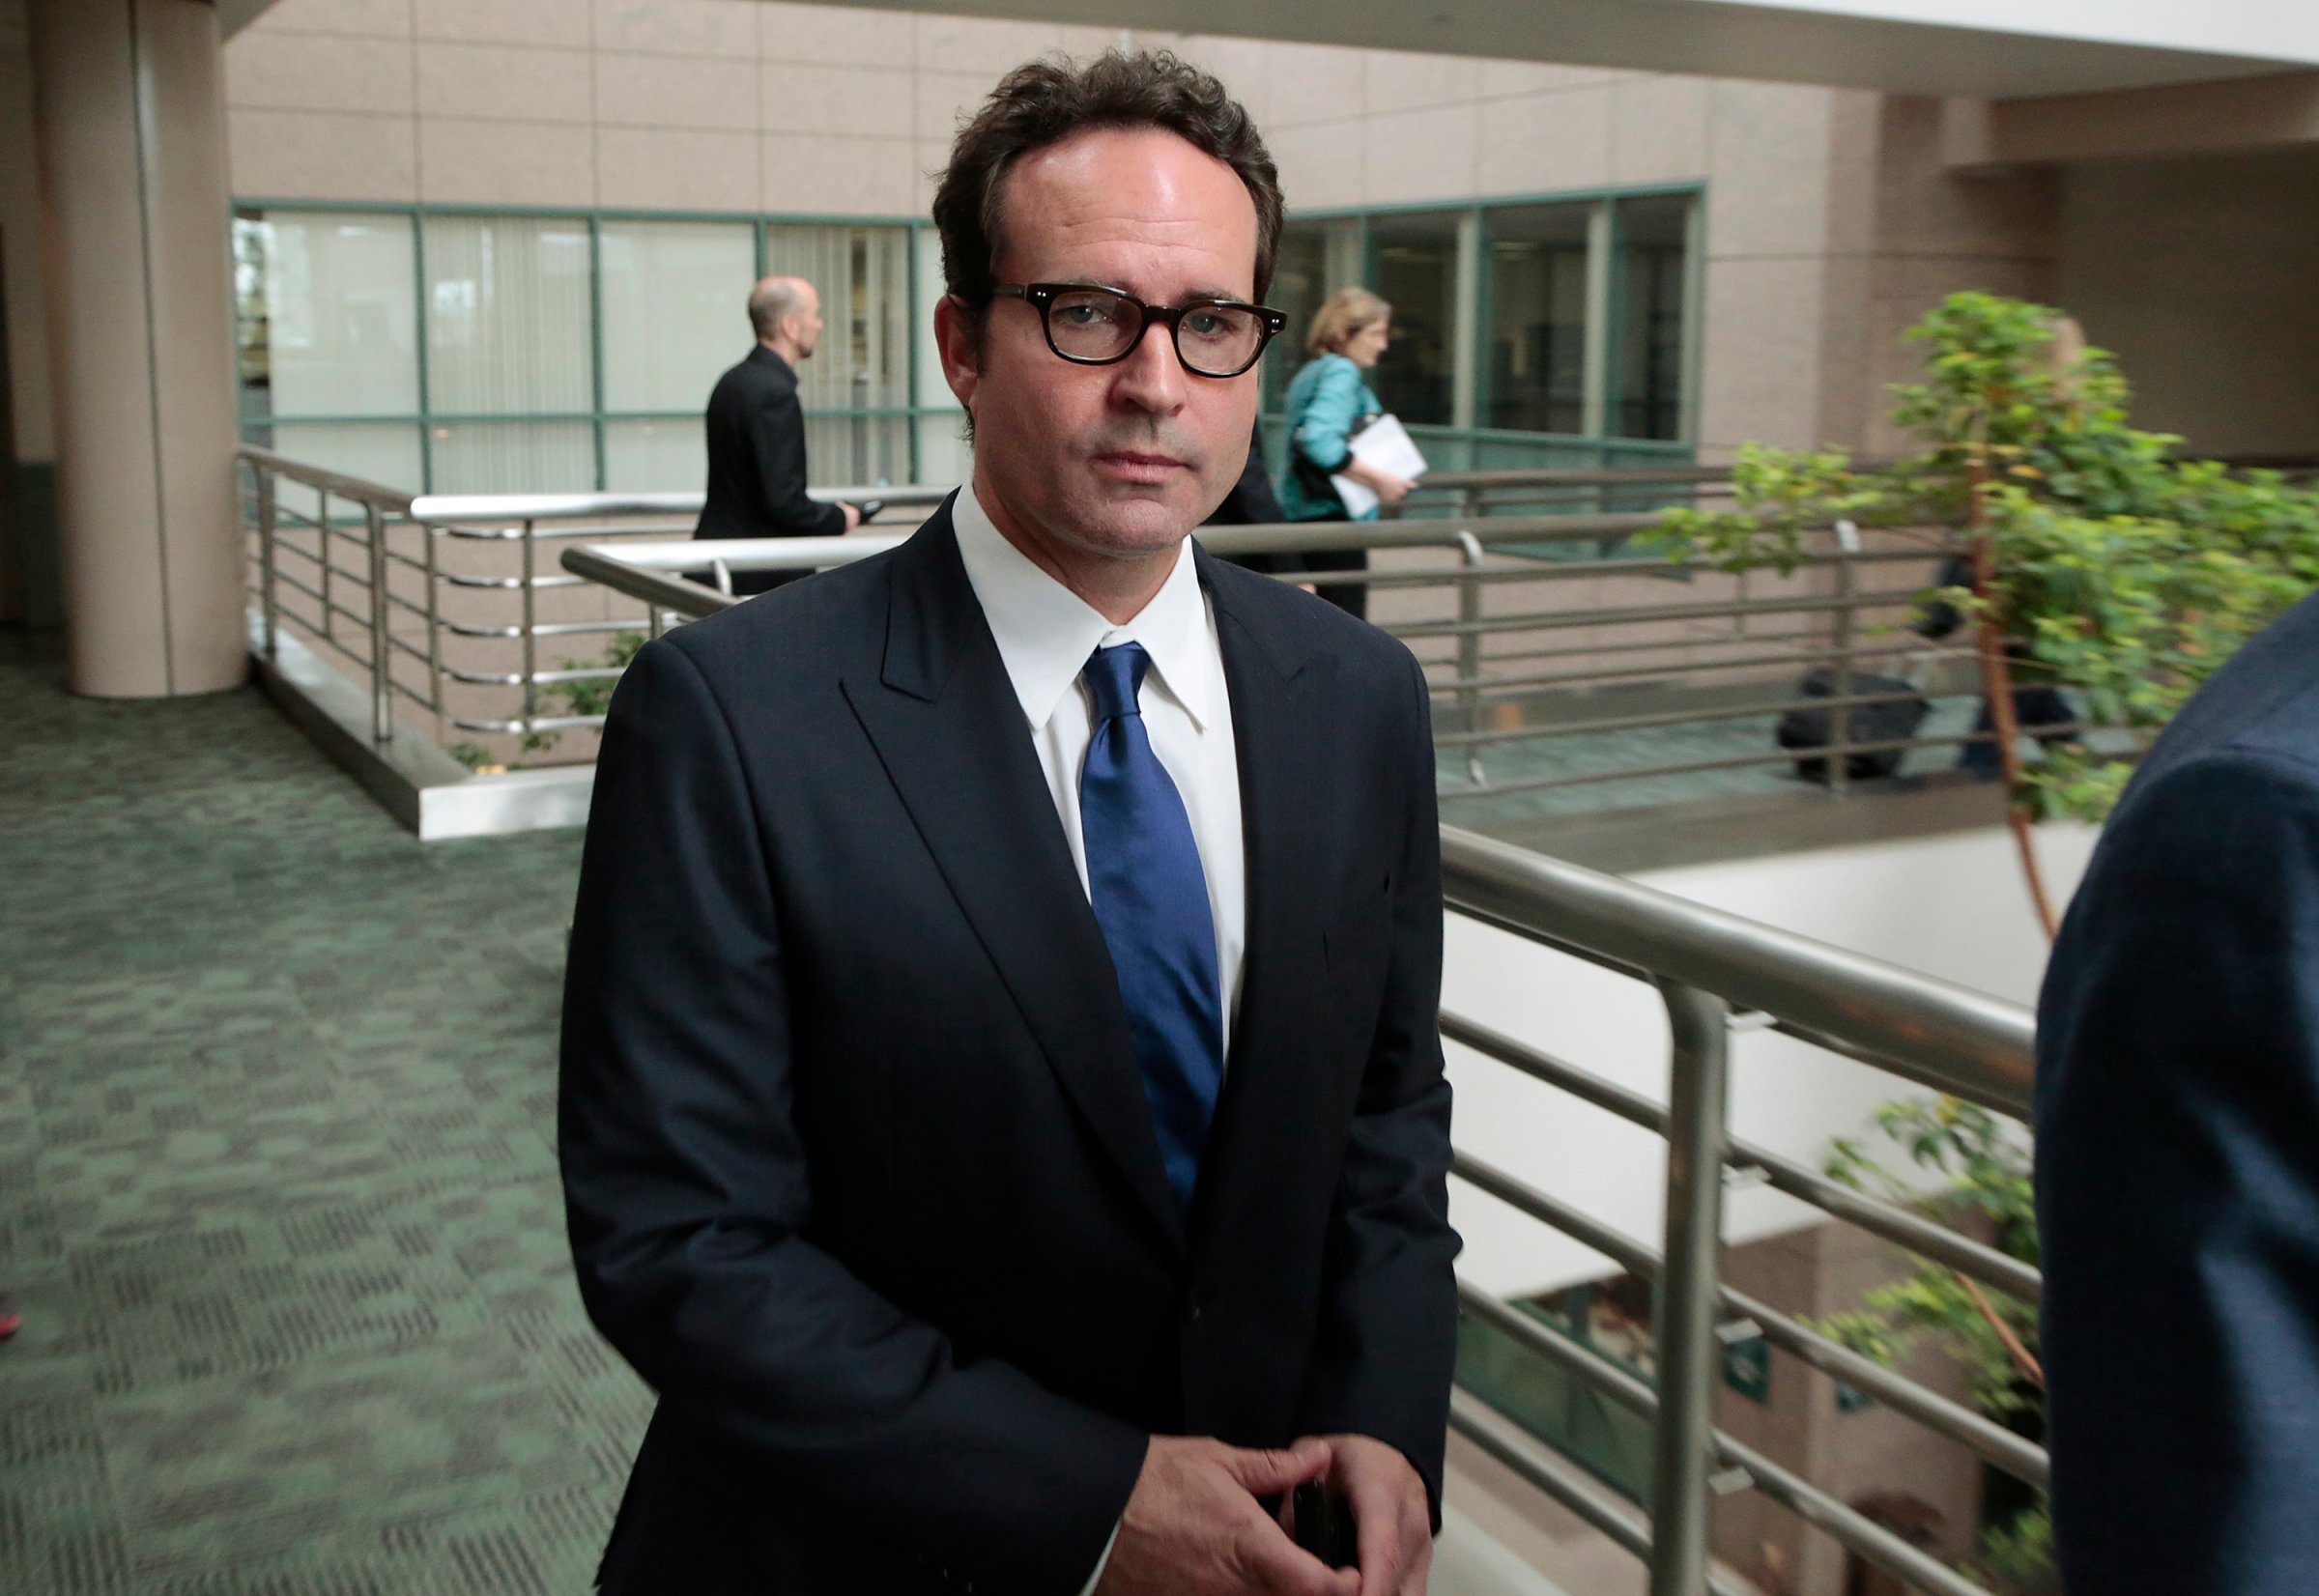 Actor Jason Patric arrives for his custody hearing at the 2nd District Court of Appeals in Los Angeles